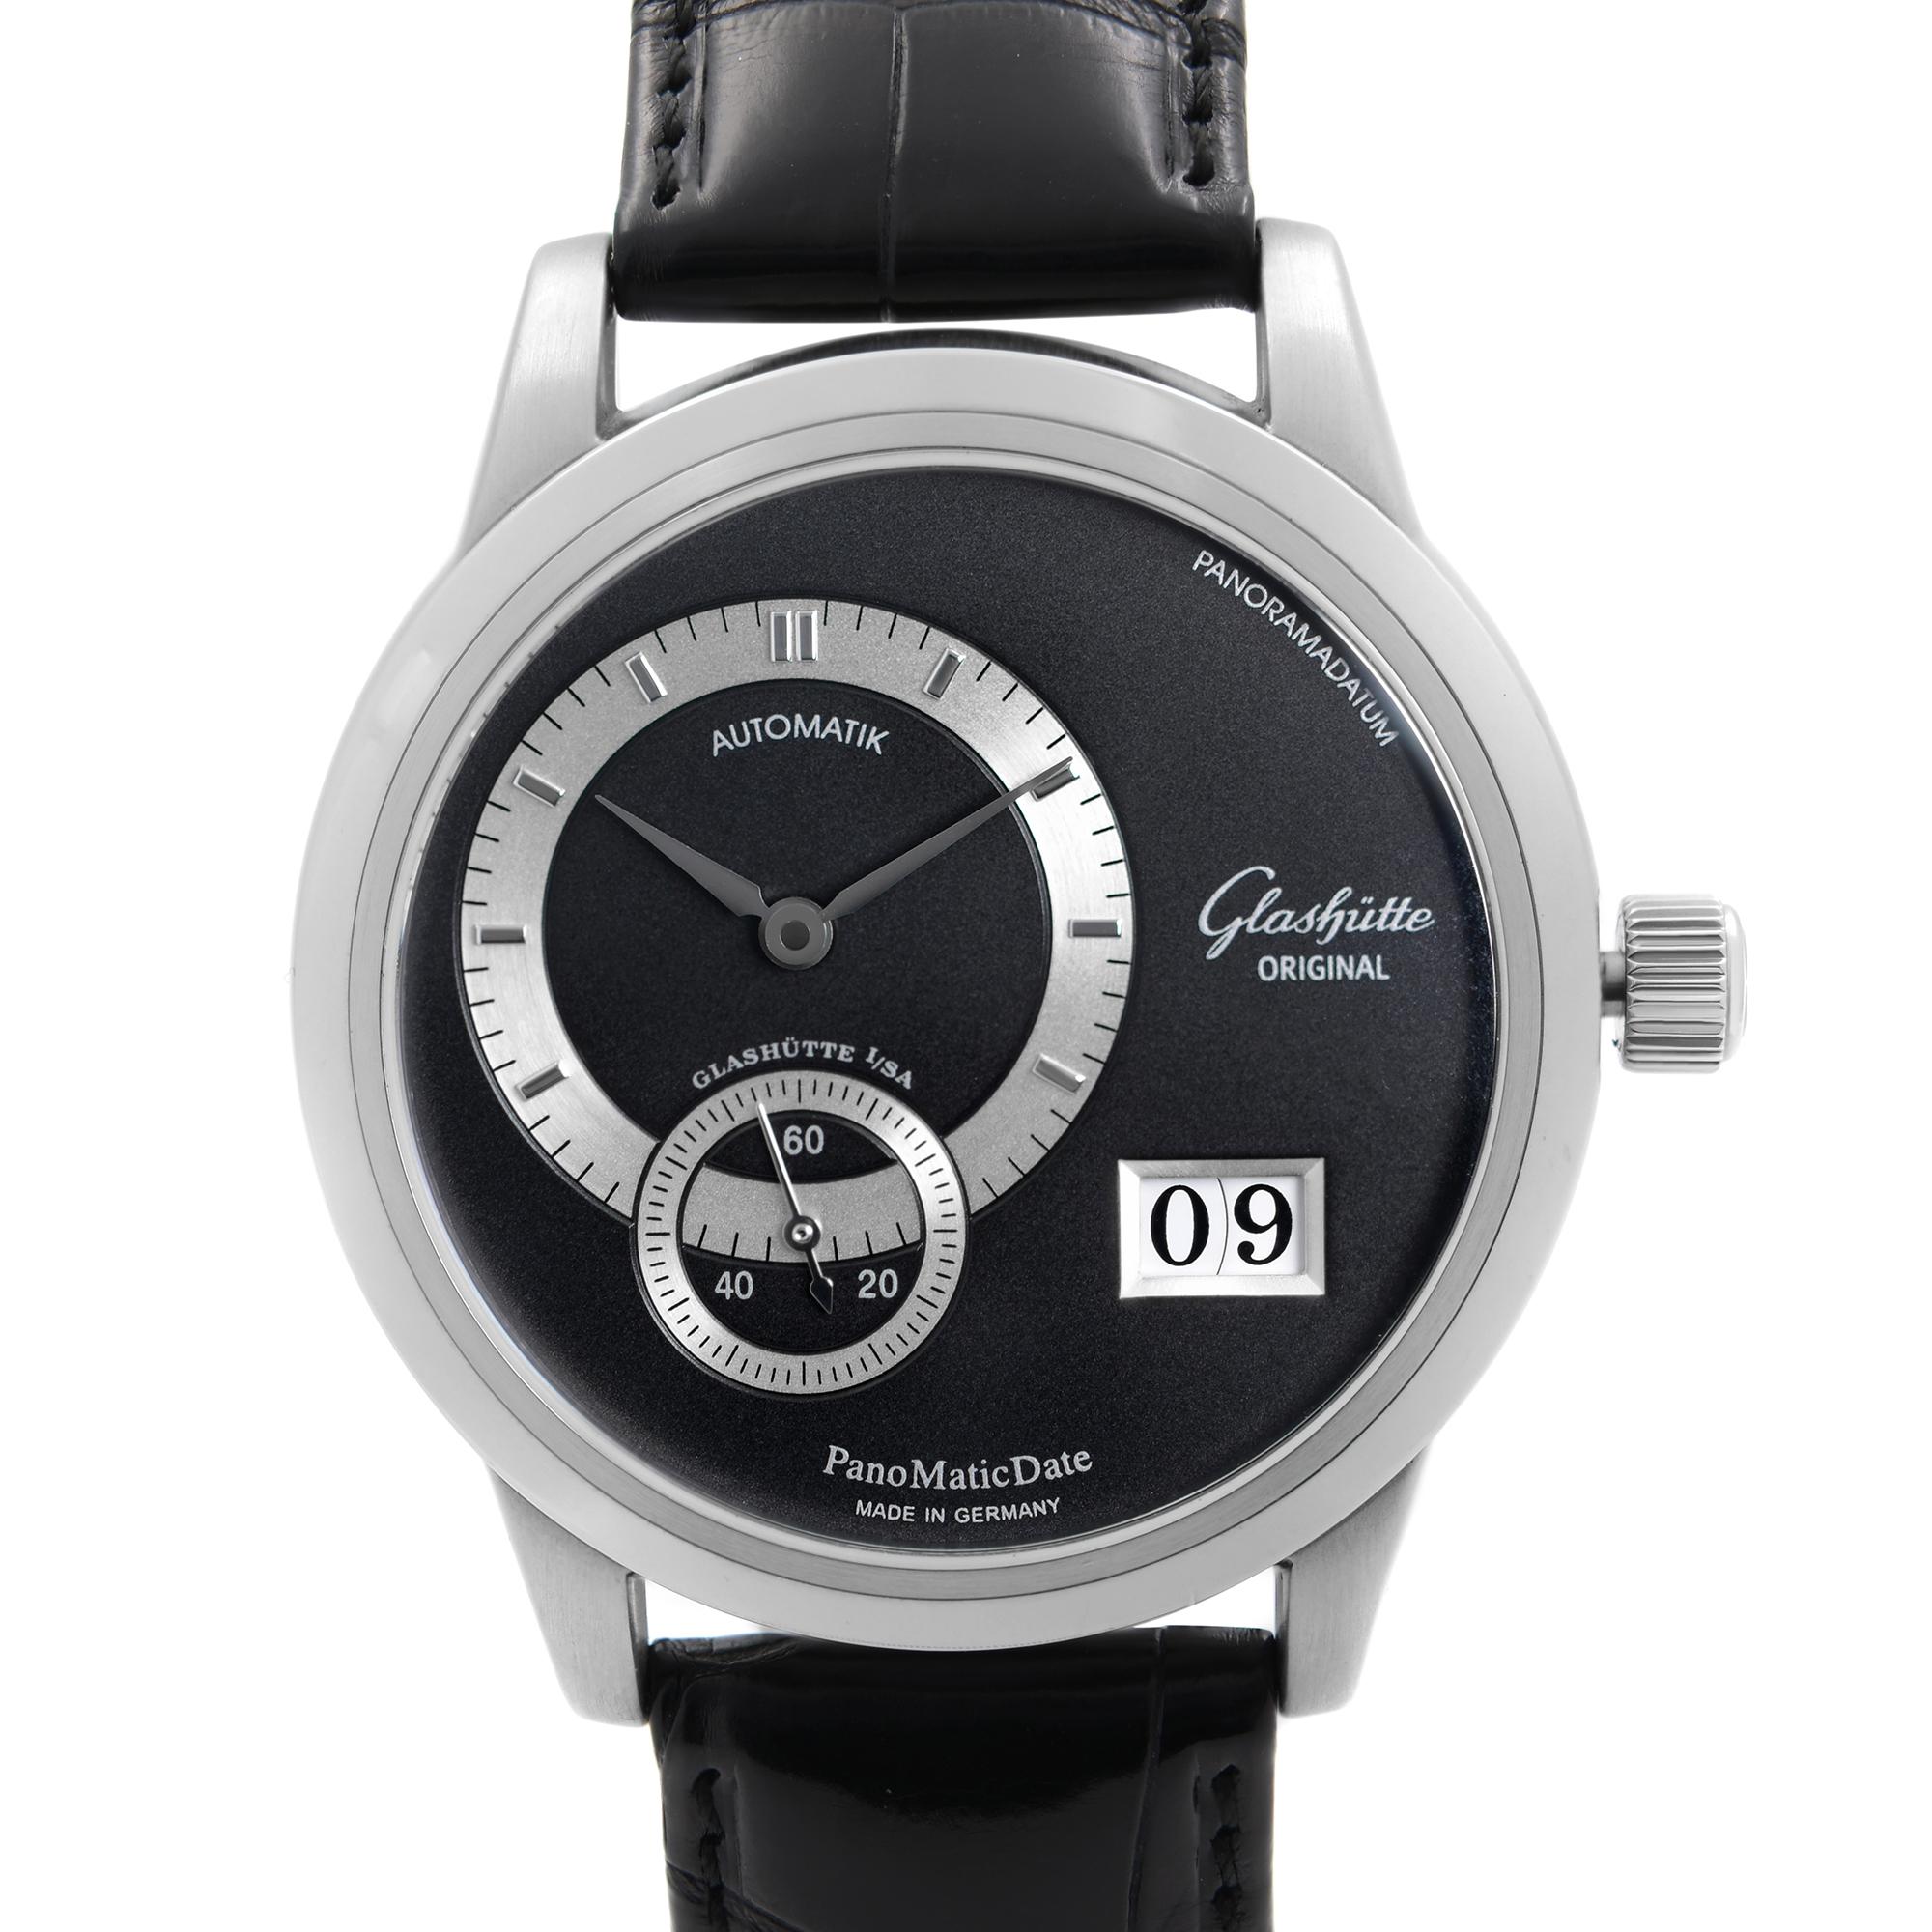 Display Model Limited Edition 174/200. Glashutte Original PanoMatic Date Platinum Black Dial Men's Watch 190-01-03-03-04. This Beautiful Timepiece is Powered by Mechanical (Automatic) Movement And Features: Round Platinum Case with a Black Leather